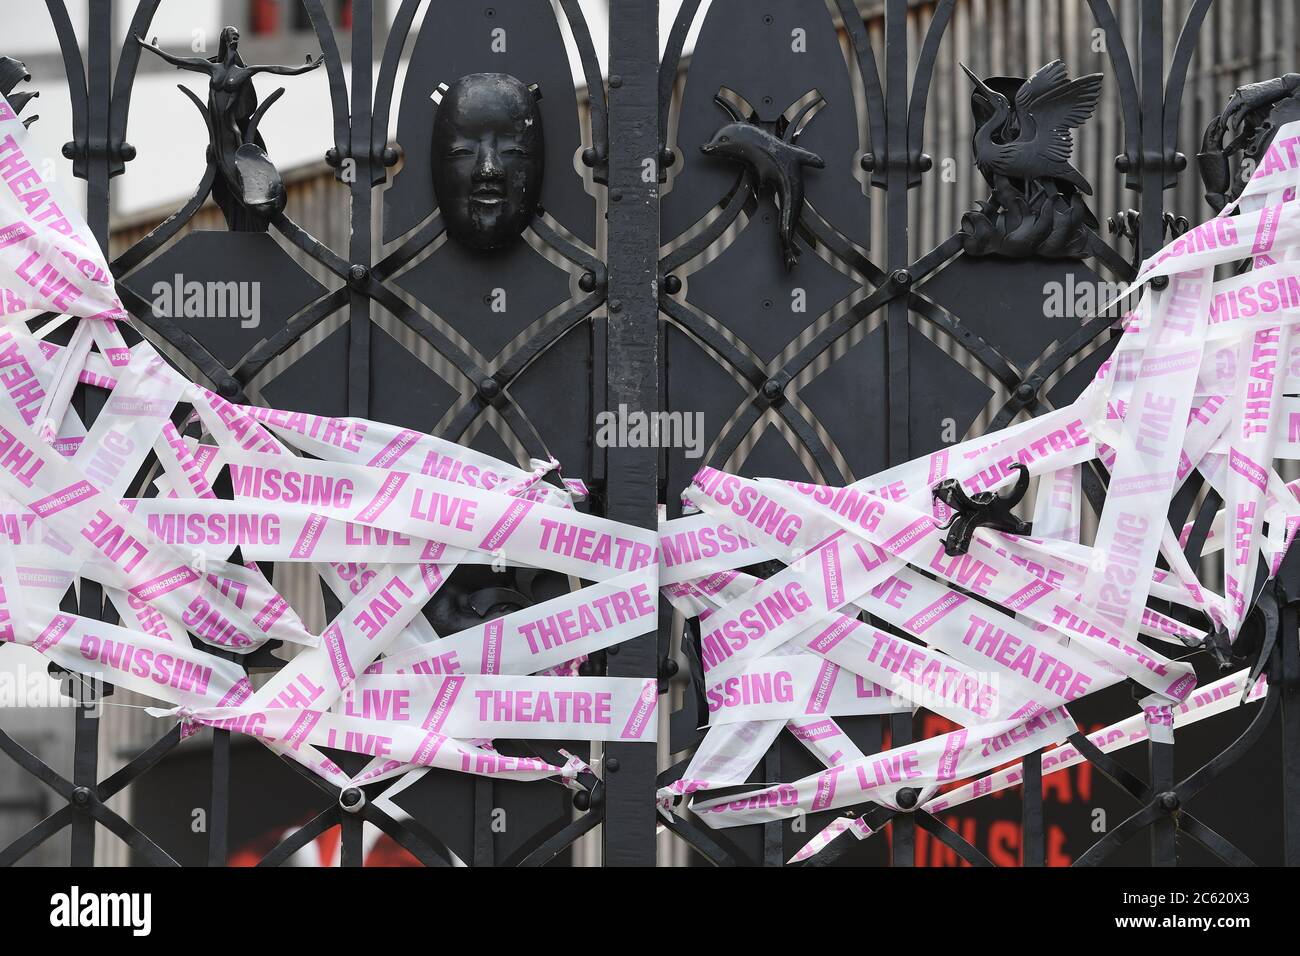 Tape covers the gates at Shakespeare's Globe theatre as a part of the Scene Change initiative, as the lifting of further lockdown restrictions in England comes into effect. Stock Photo